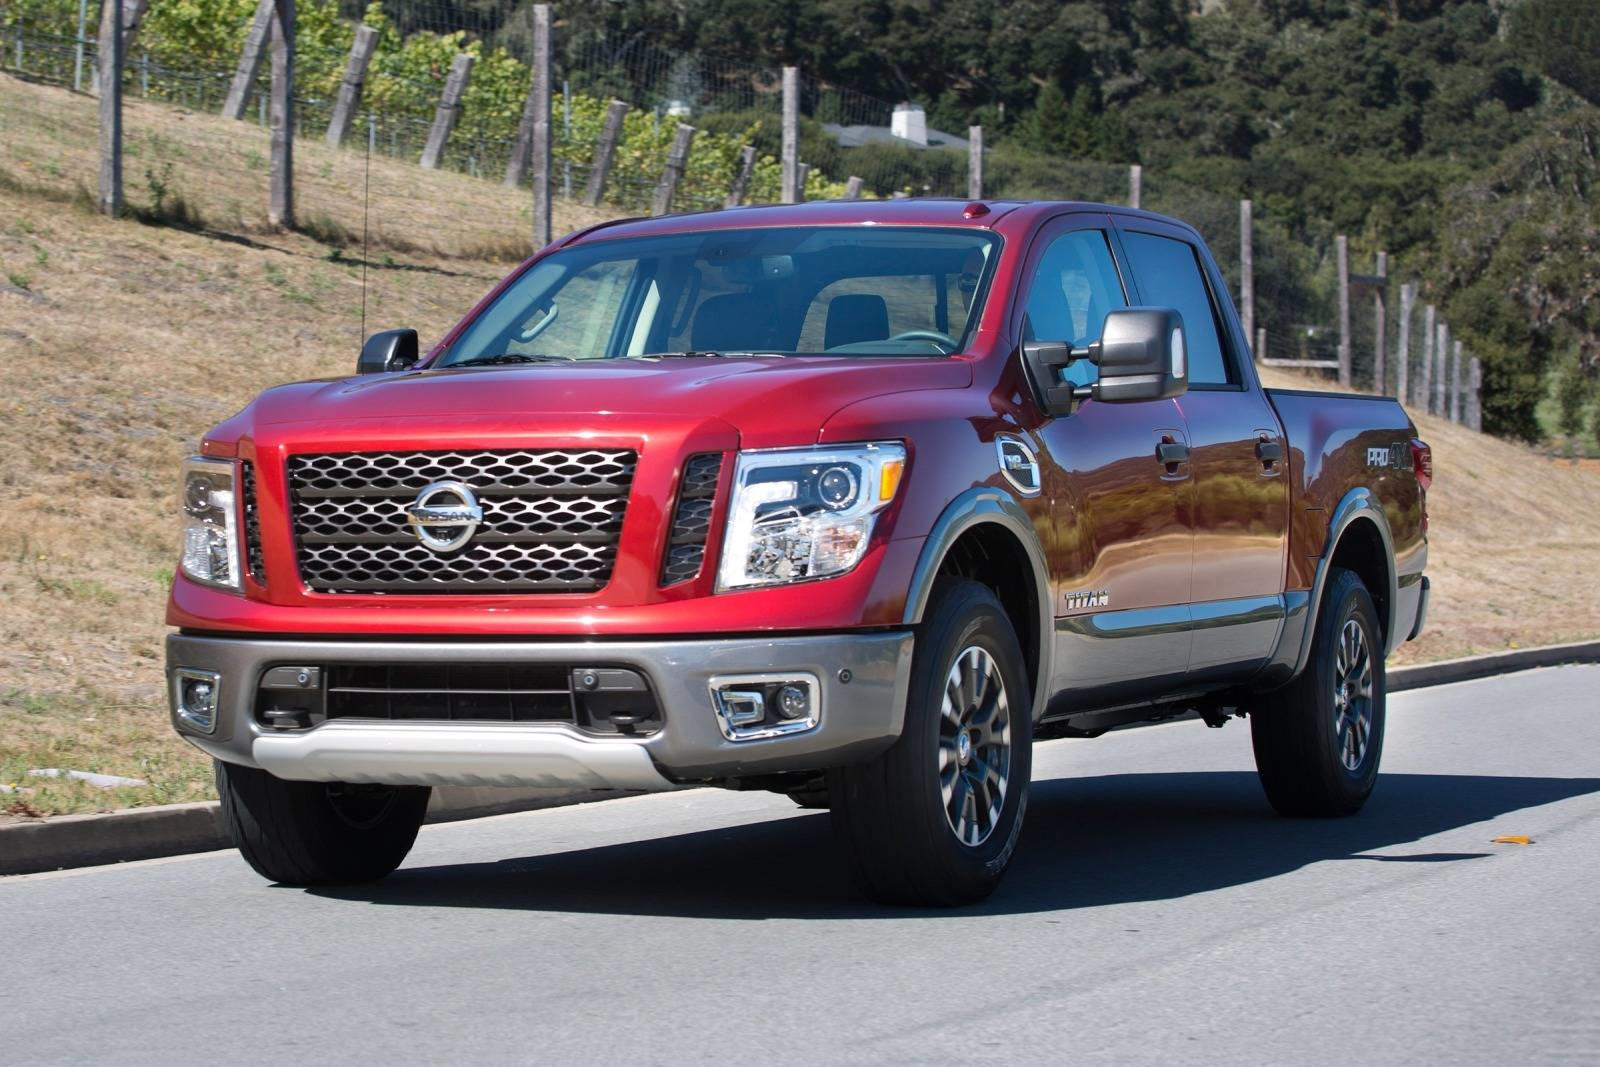 2017 Nissan Titan Front View Driving